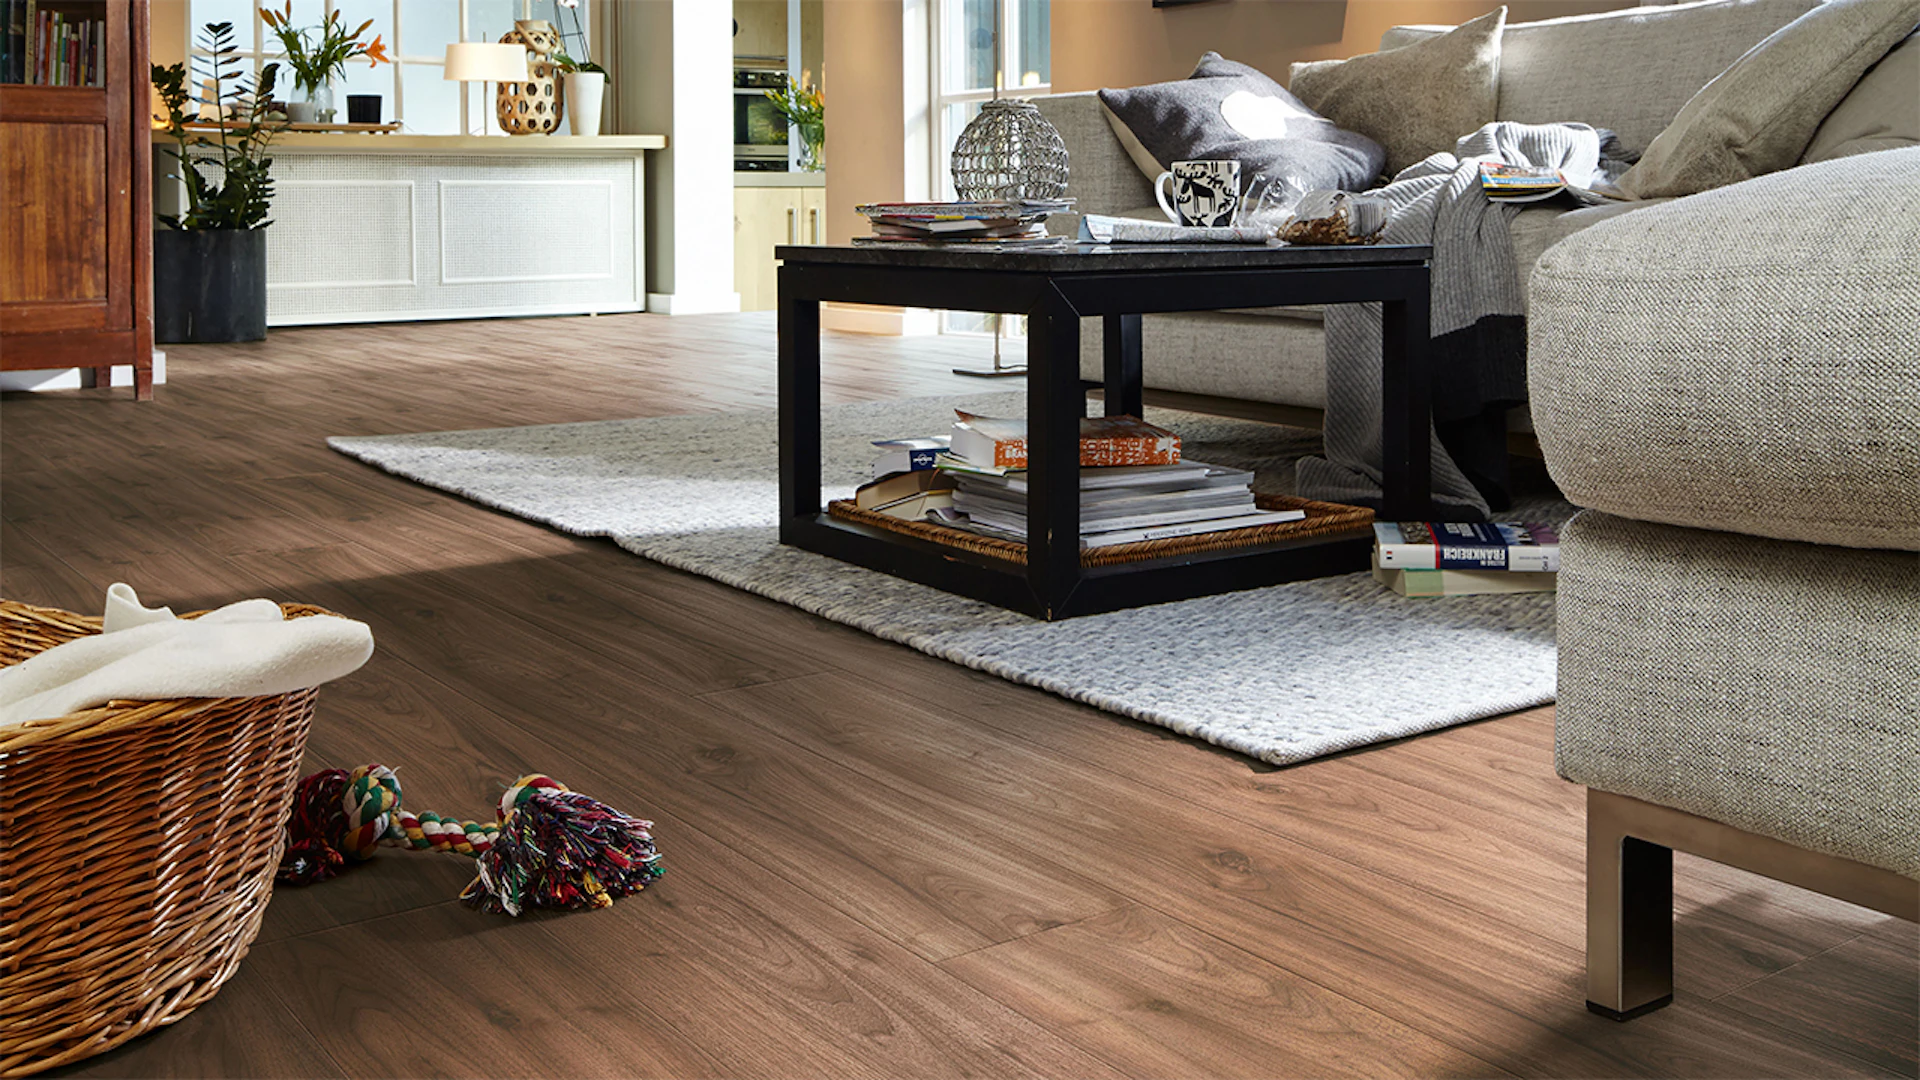 MEISTER Laminate - MeisterDesign LL 150 Walnut Amore 06389 | Made in Germany (600007-2052220-06389)